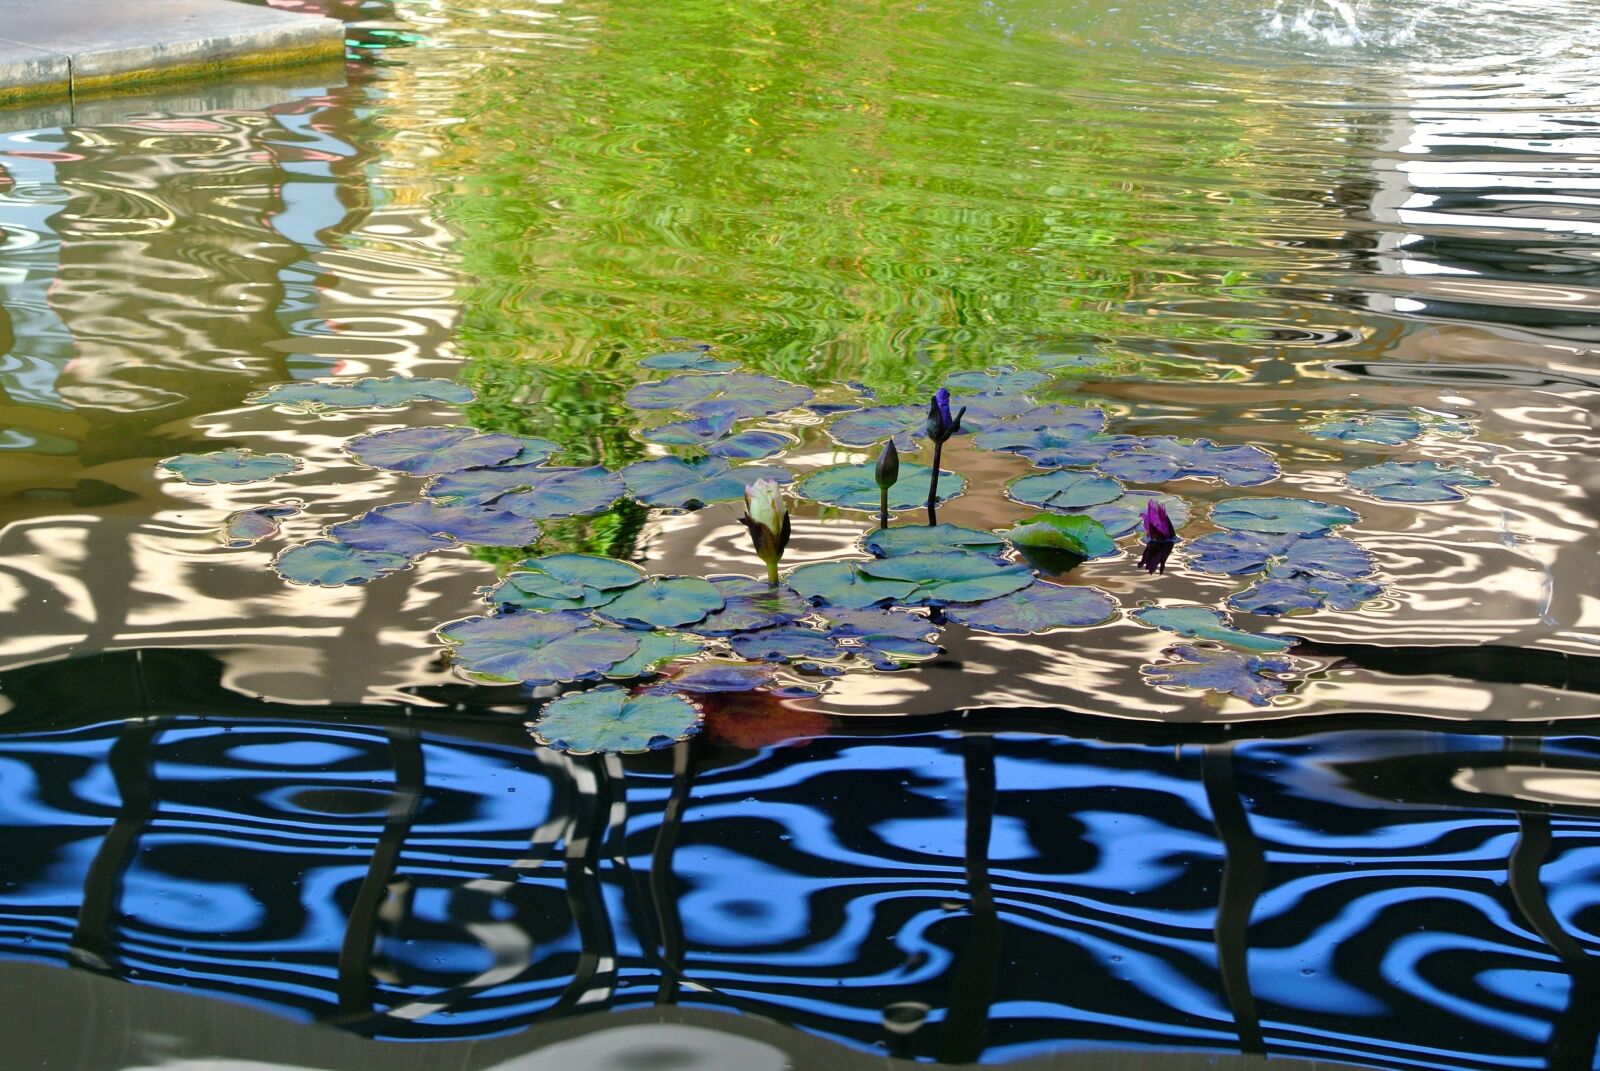 Nikon 1 J1 sample photo. Water, pond, feature photography